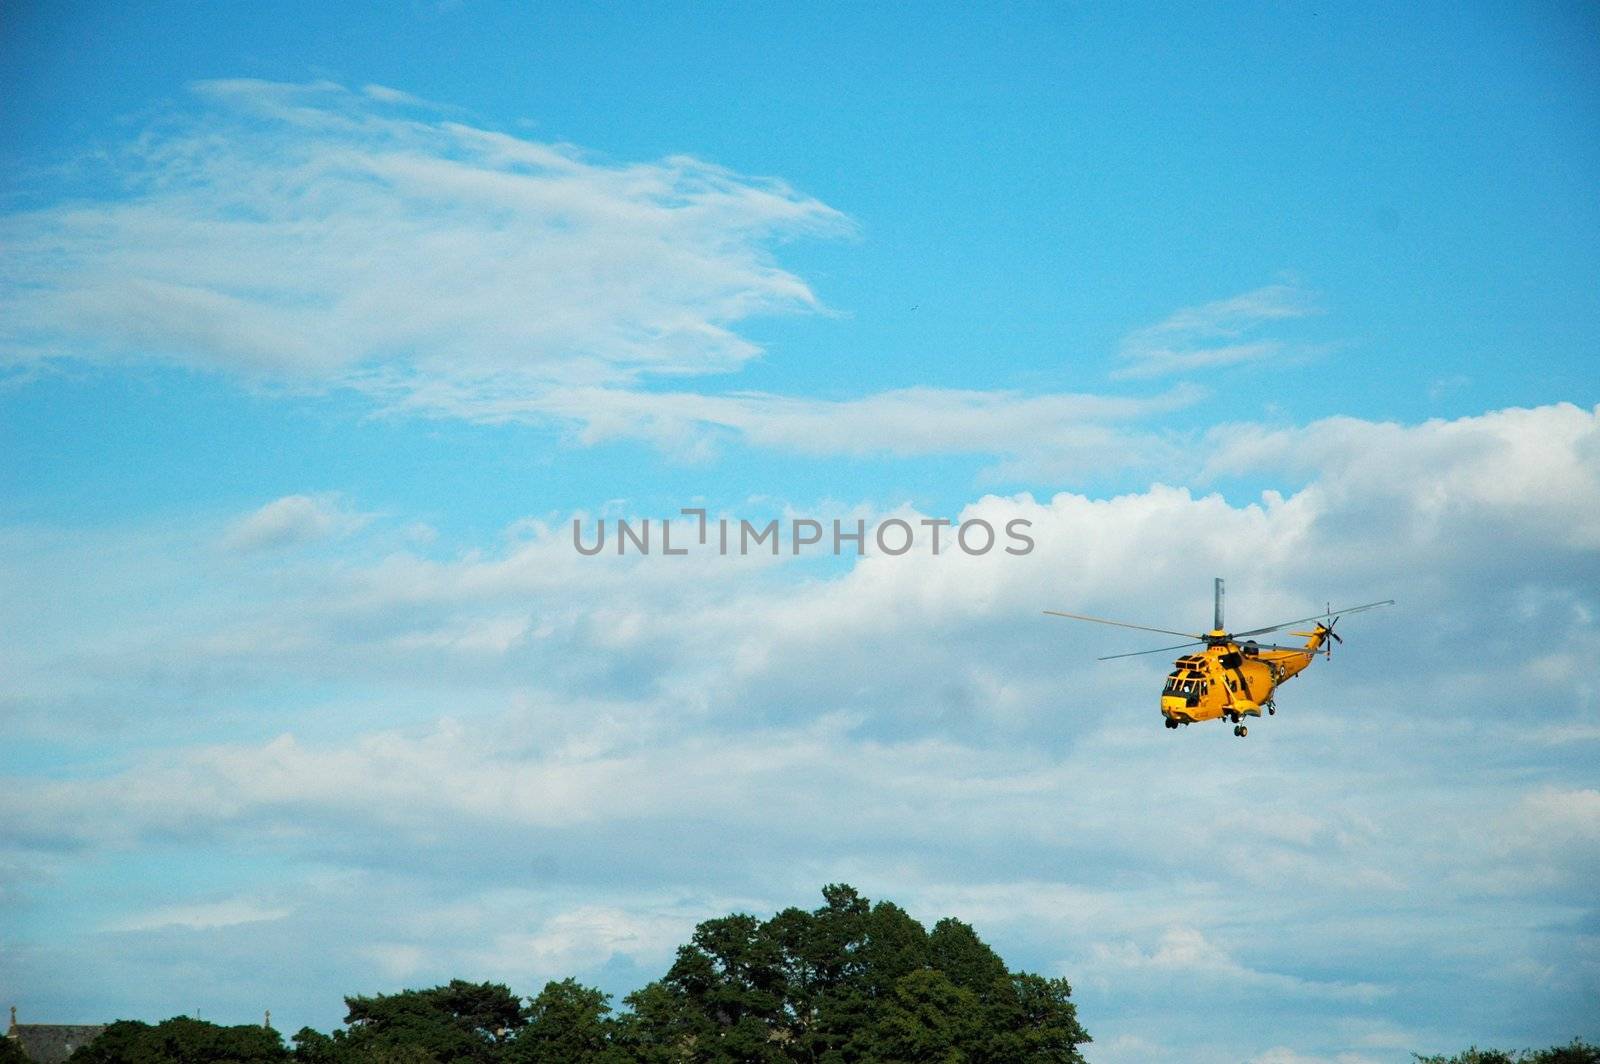 helicopter above trees in sunny day, horizontally framed picture